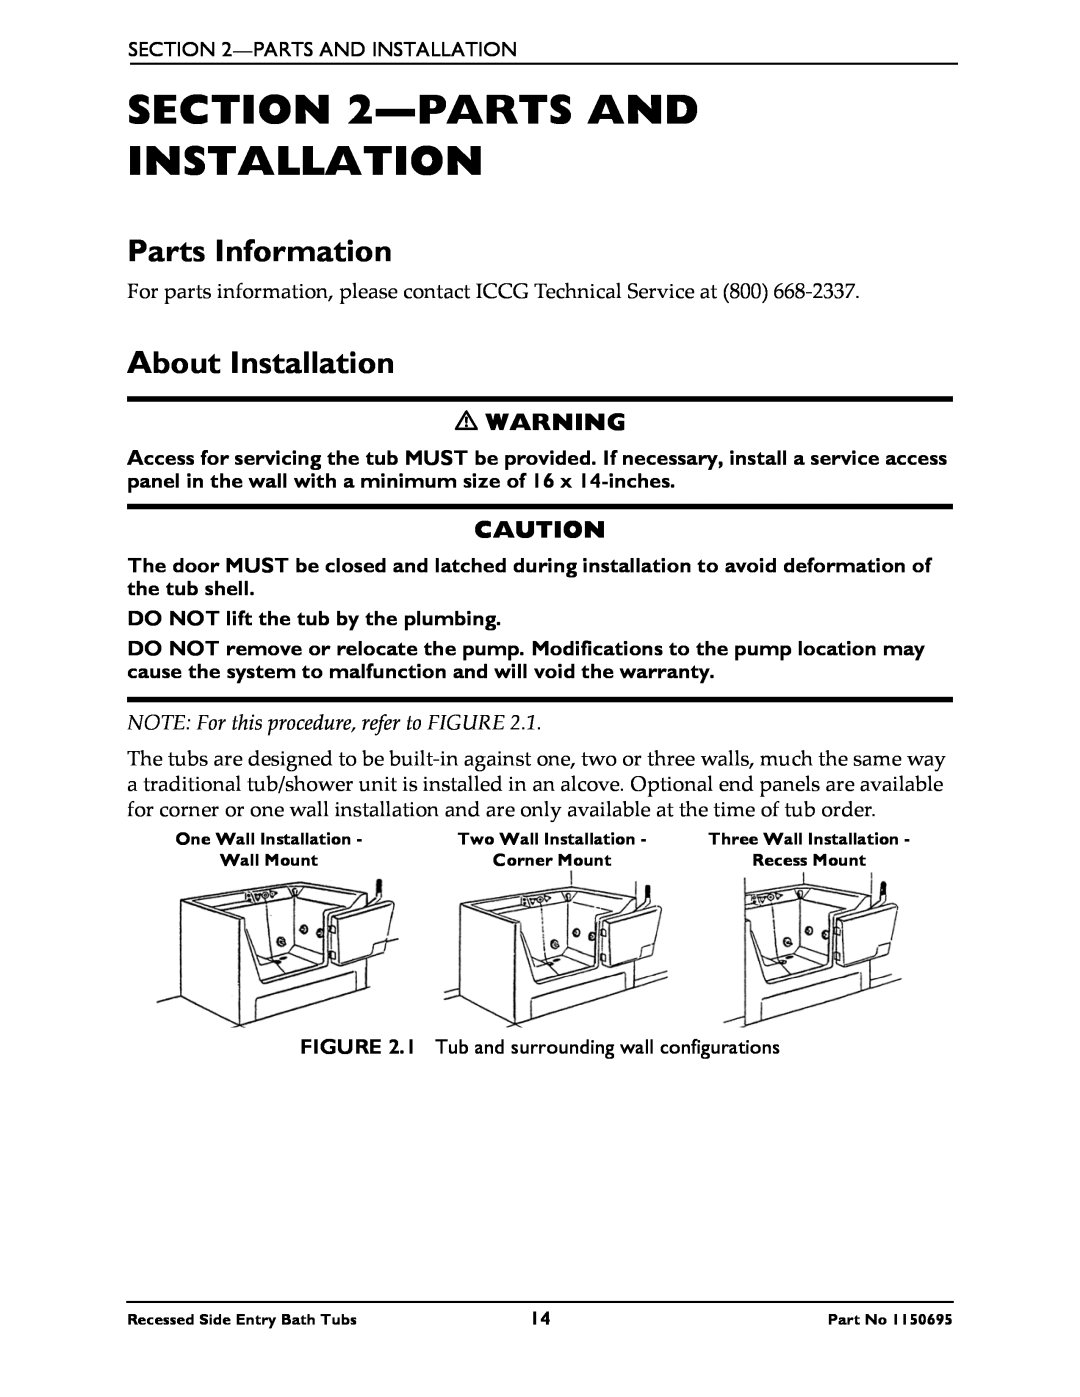 Invacare 3800 Parts And Installation, Parts Information, About Installation, NOTE For this procedure, refer to FIGURE 